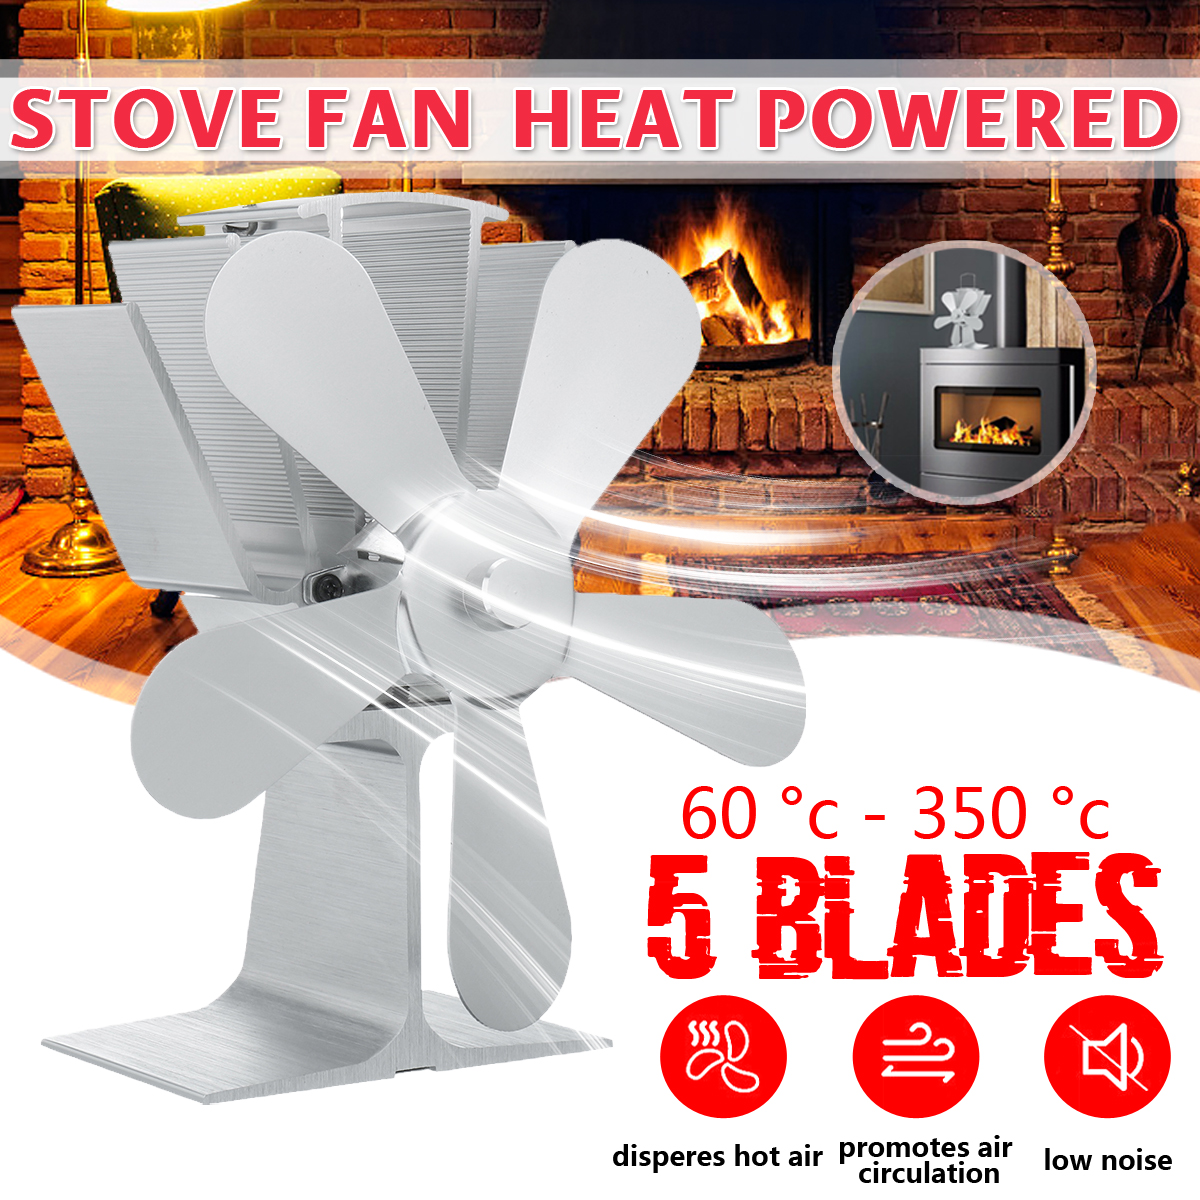 5-Blades-Fireplace-Eco-Fan-Self-starting-Self-regulating-Thermal-Fire-Heater-Power-Quiet-Wood-Stove--1554514-1